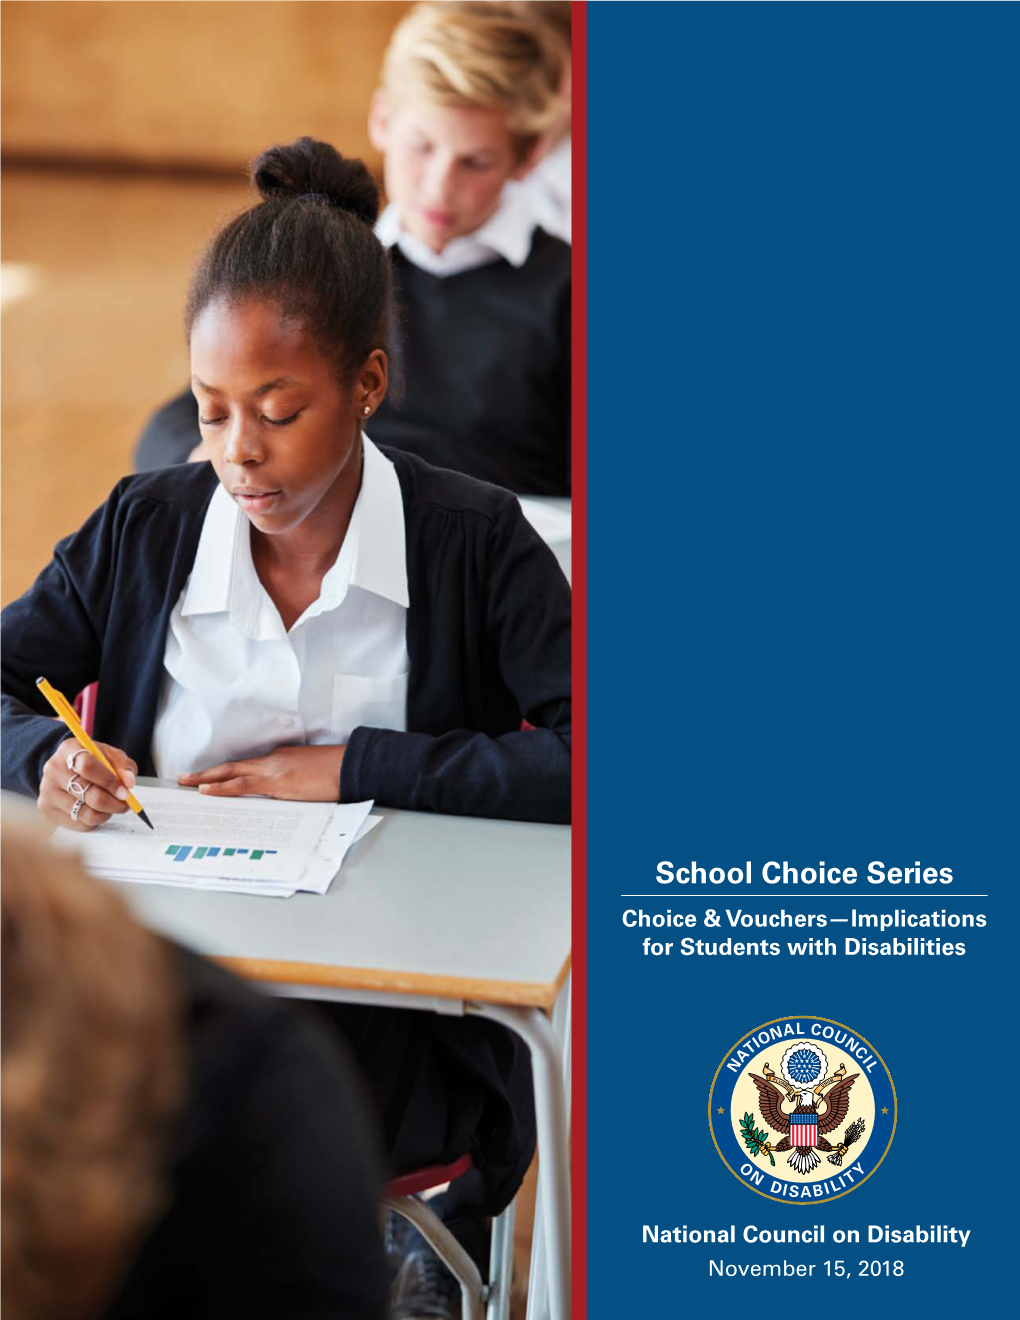 School Choice Series Choice & Vouchers—Implications for Students with Disabilities